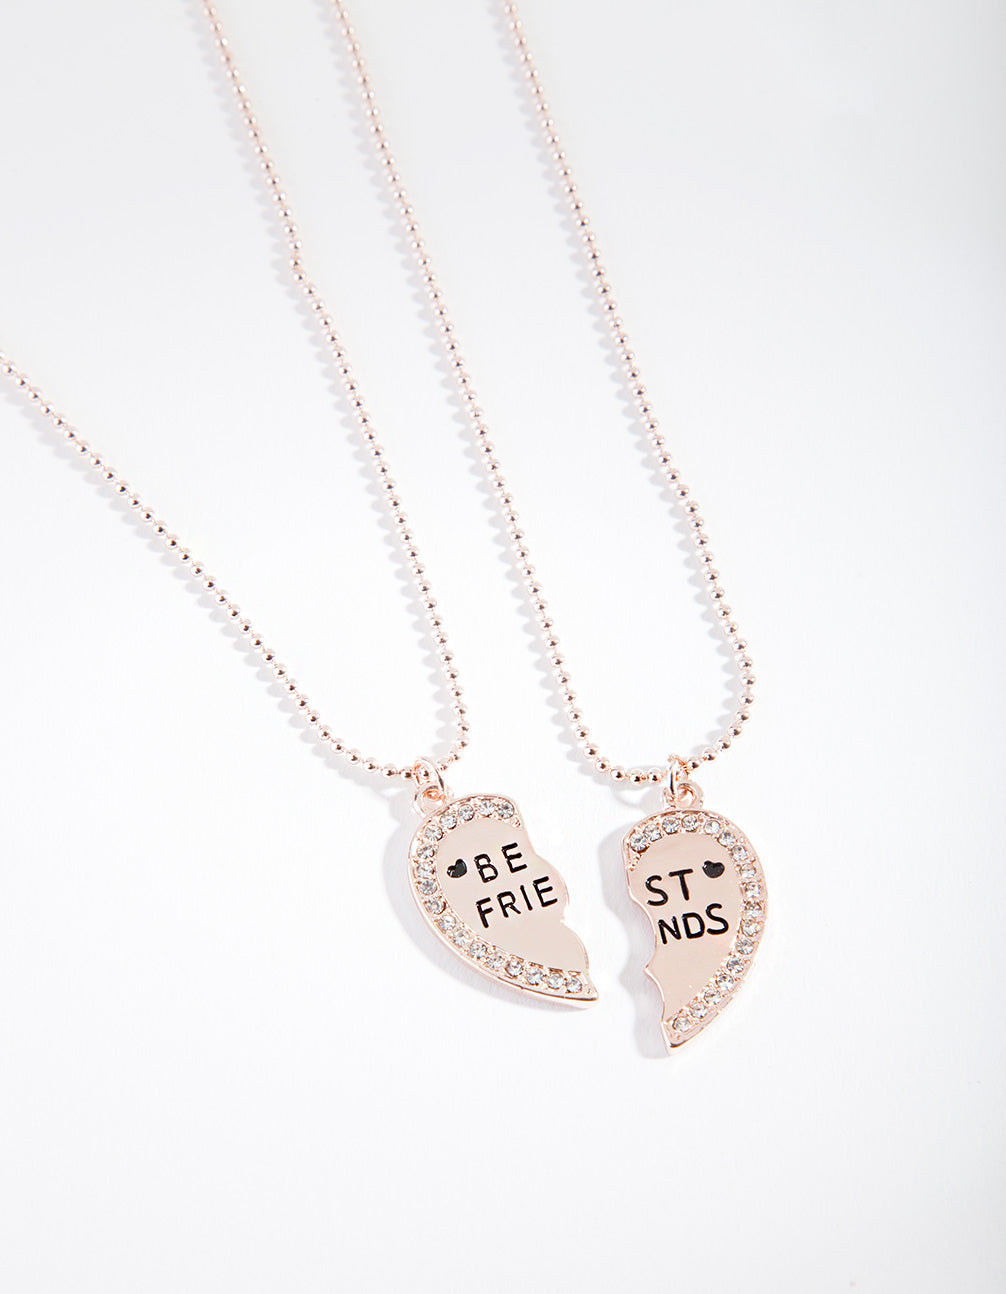 Sisadodo Bff Friendship Necklace For 2 - Best Friend Necklaces Bff Gifts  For 2 Matching Heart Best Friends Forever Pendant Necklaces Set For Girl :  Amazon.in: Jewellery